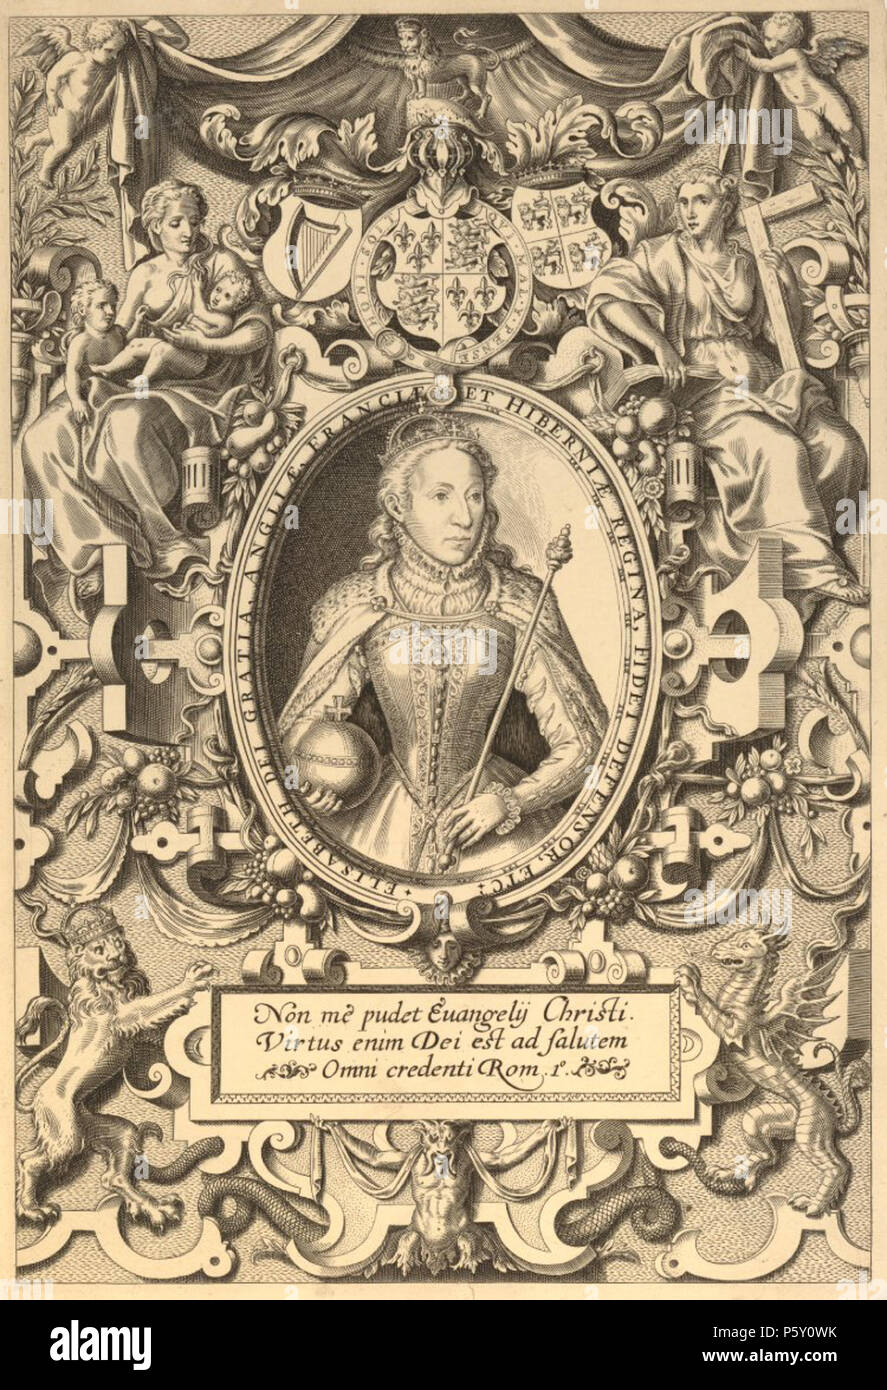 N/A. Frontispiece to the Bishops Bible of 1568 showing Elizabeth I holding the orb and sceptre in a border of strap-work, with the figures of Faith and Charity, and the royal coat of arms. 1568. Franz Hogenberg 505 Elizabeth I Frontispiece Bishops Bible 1568 Stock Photo